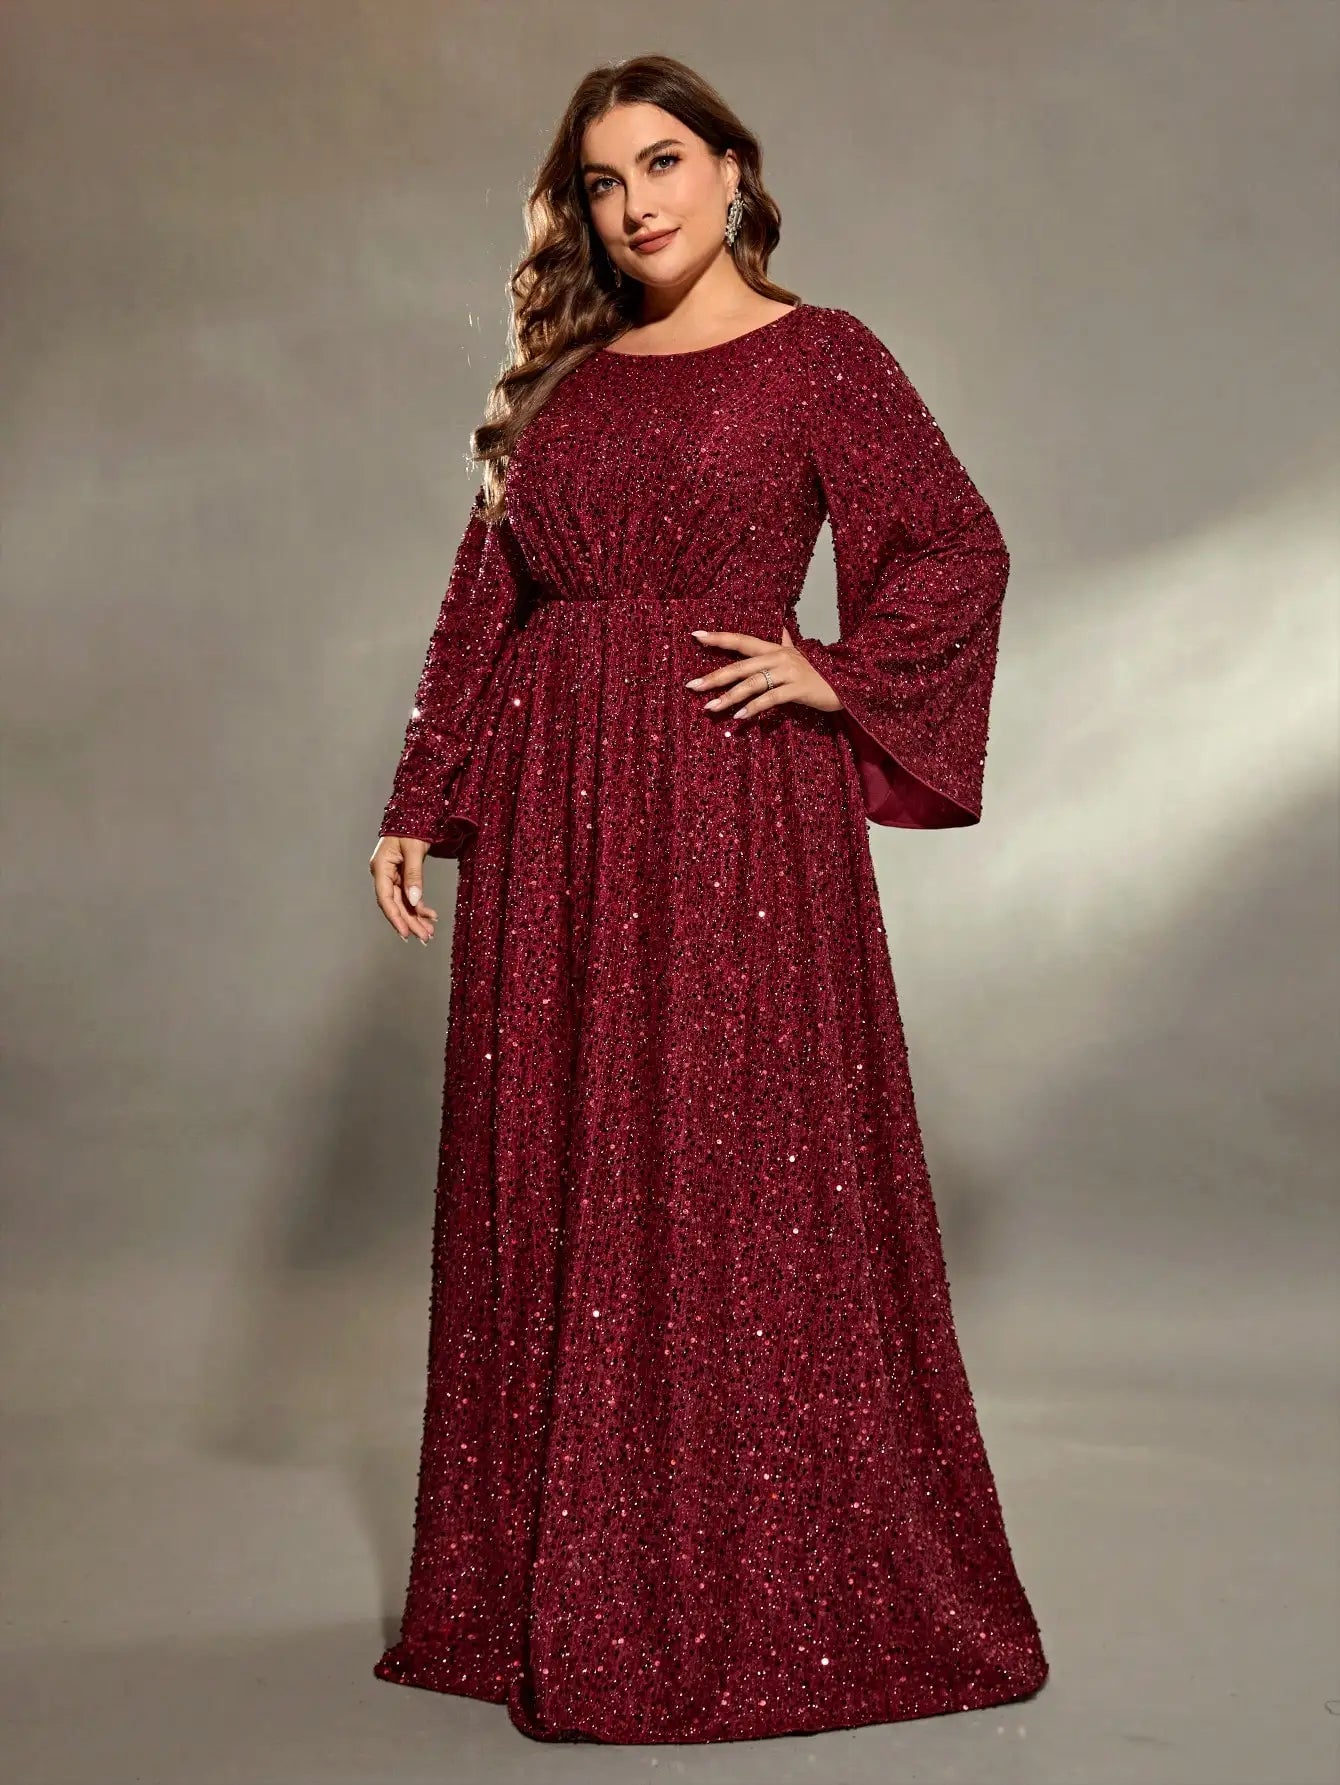 Mgiacy  plus size  Round neck flared sleeves bust pleated sequins A full skirt Evening gown PROM dress Party dress